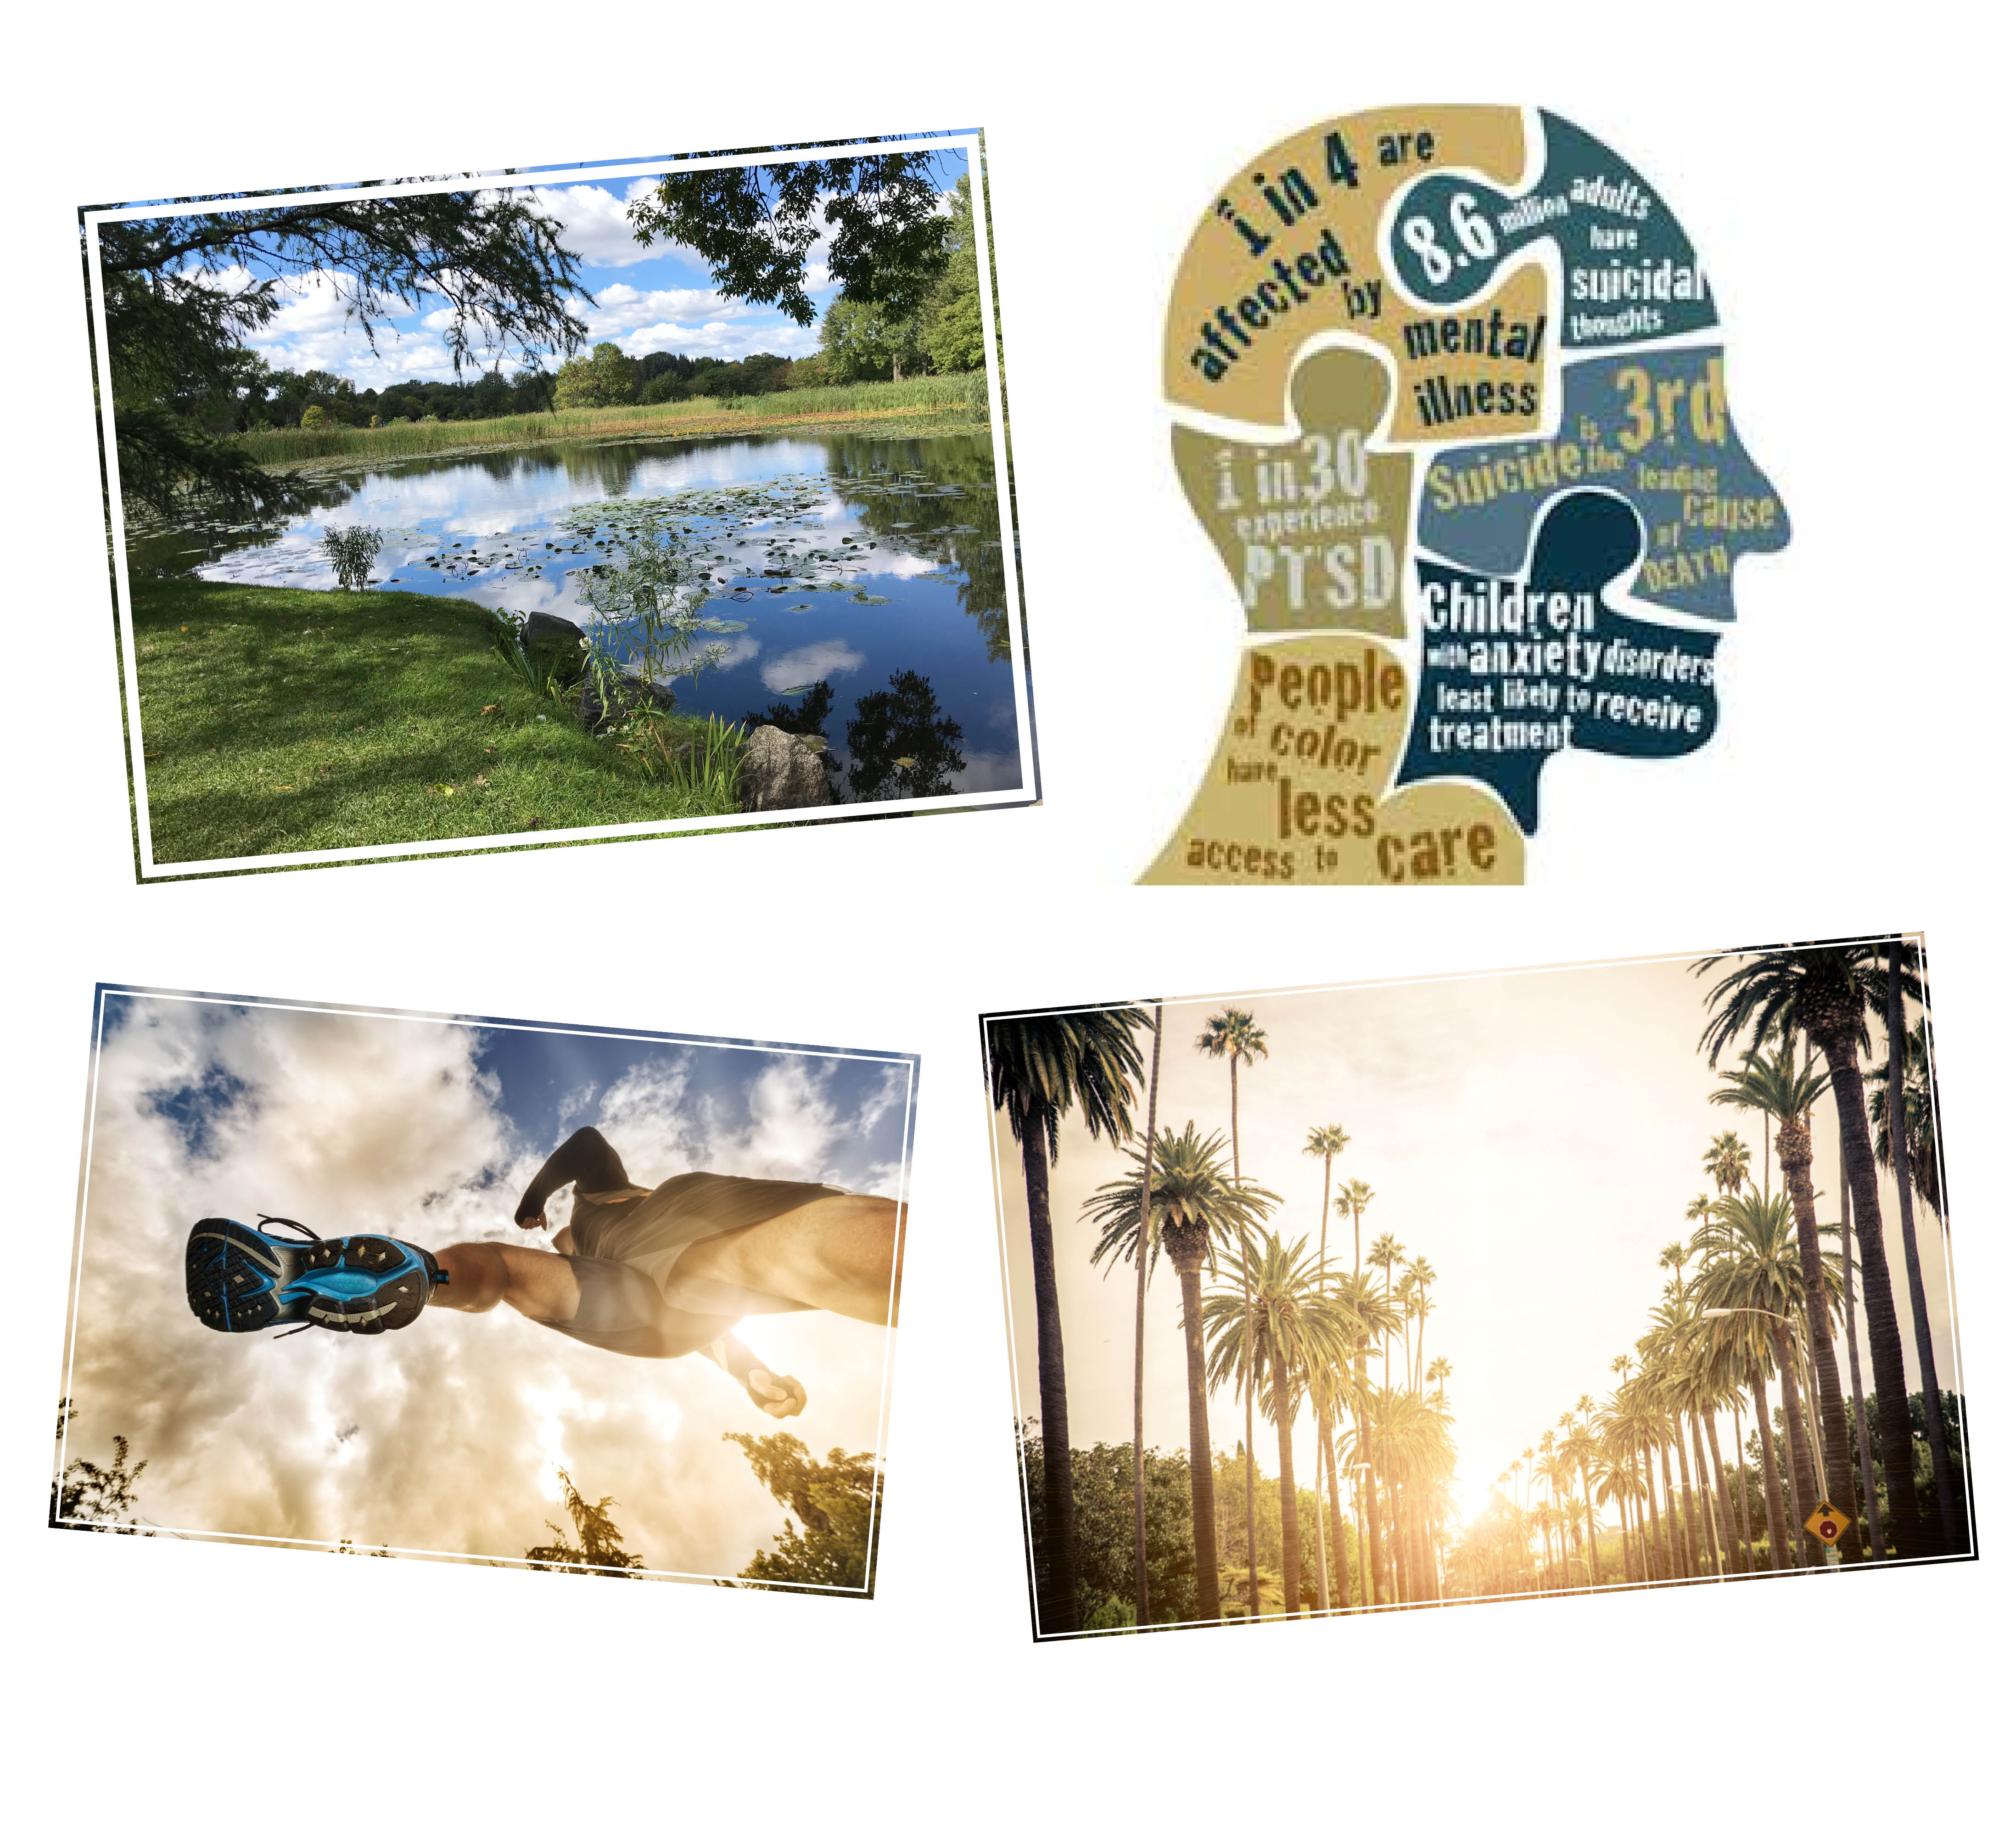 4 Beautiful Pictures of Green Landscapes, Mental Health Diagrams, and Los Angeles Palm Trees.